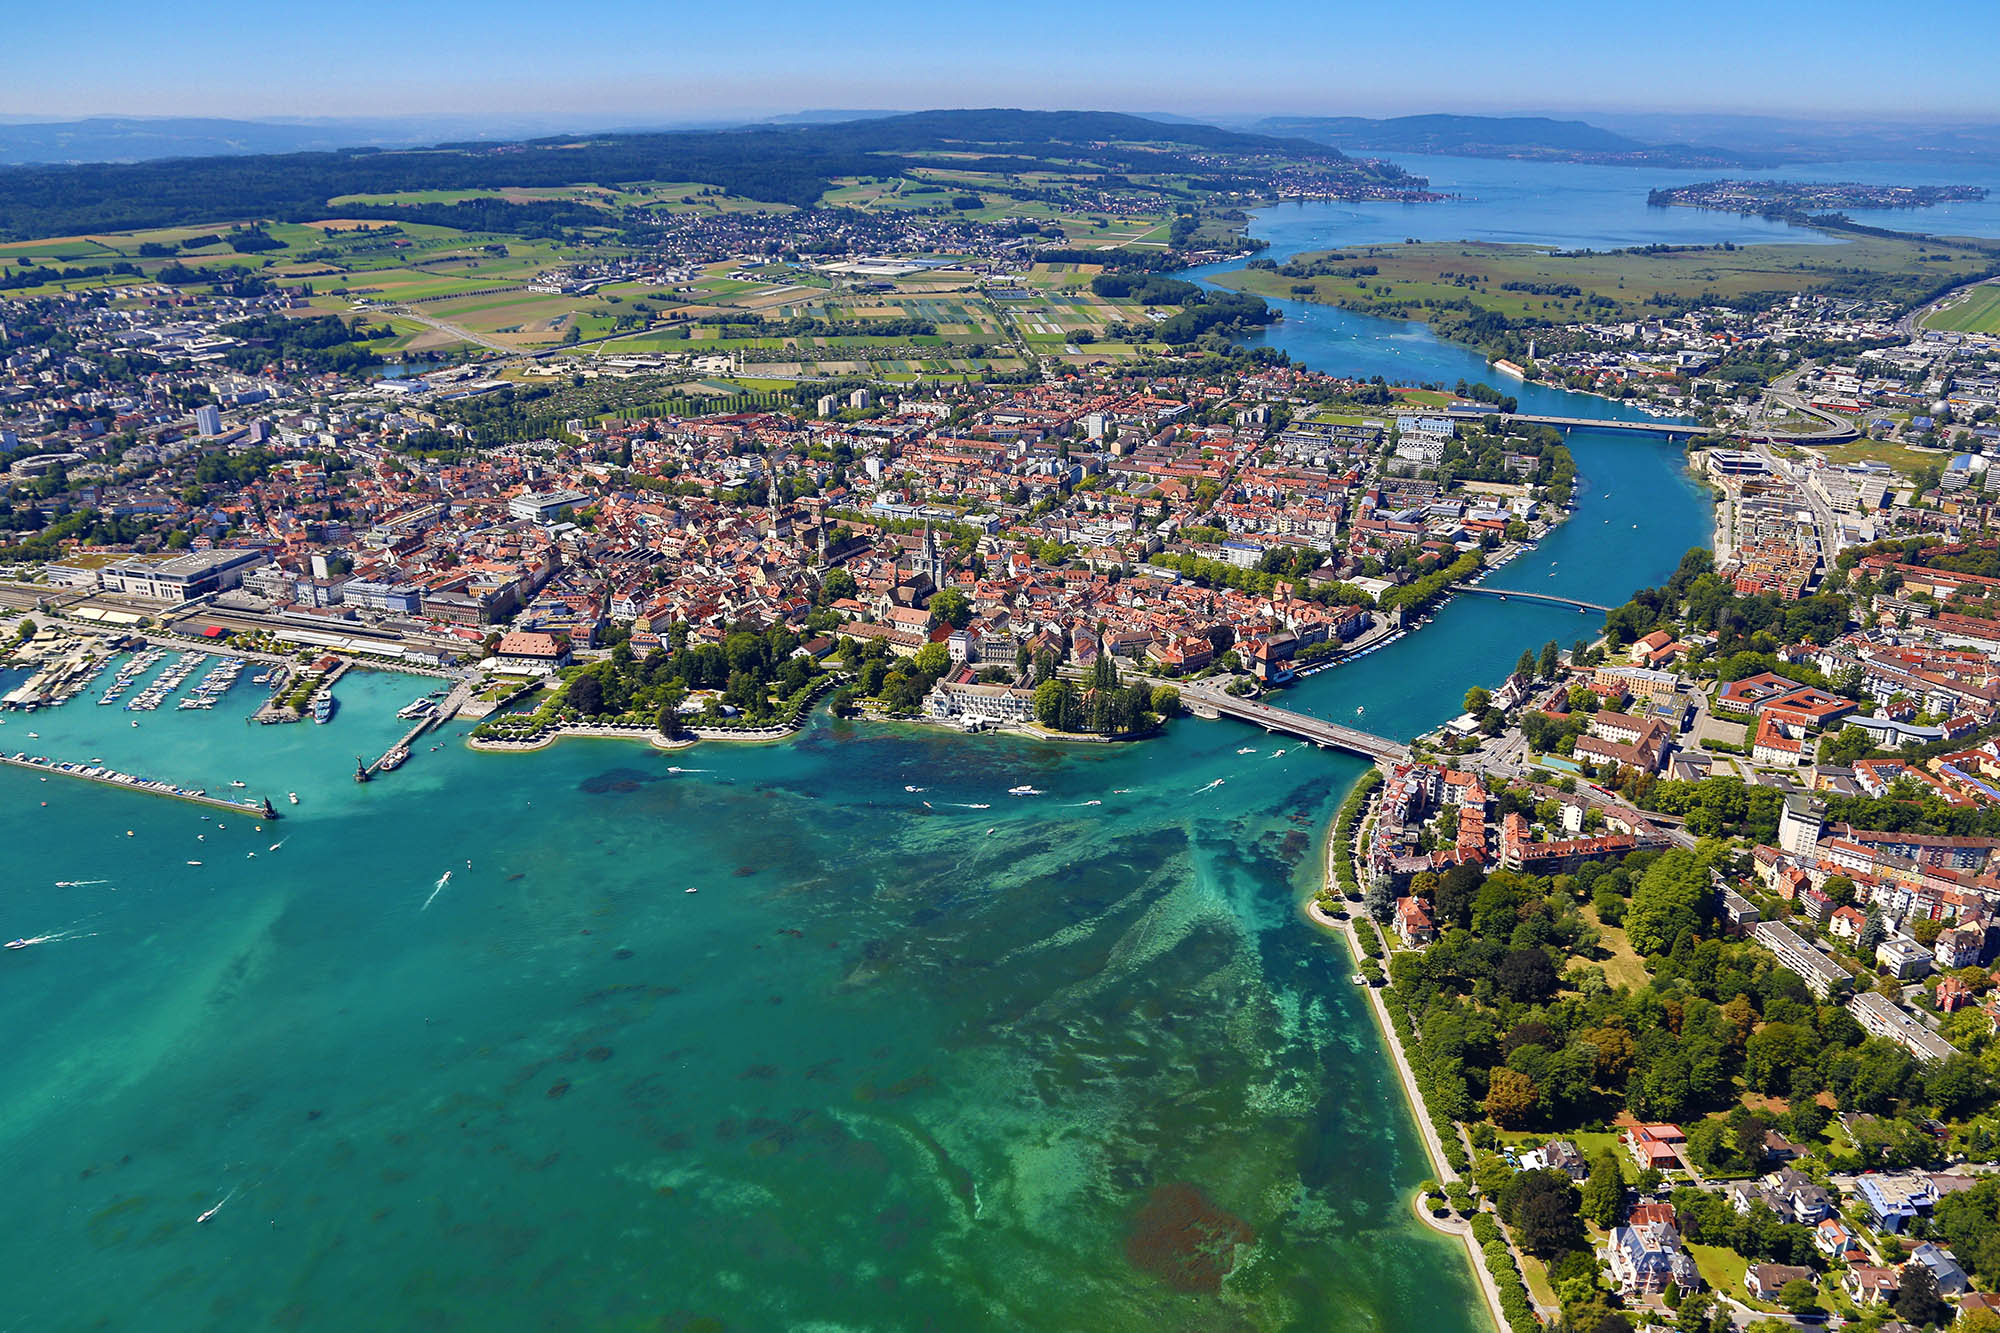 Constance funnel - cycling holiday on Lake Constance